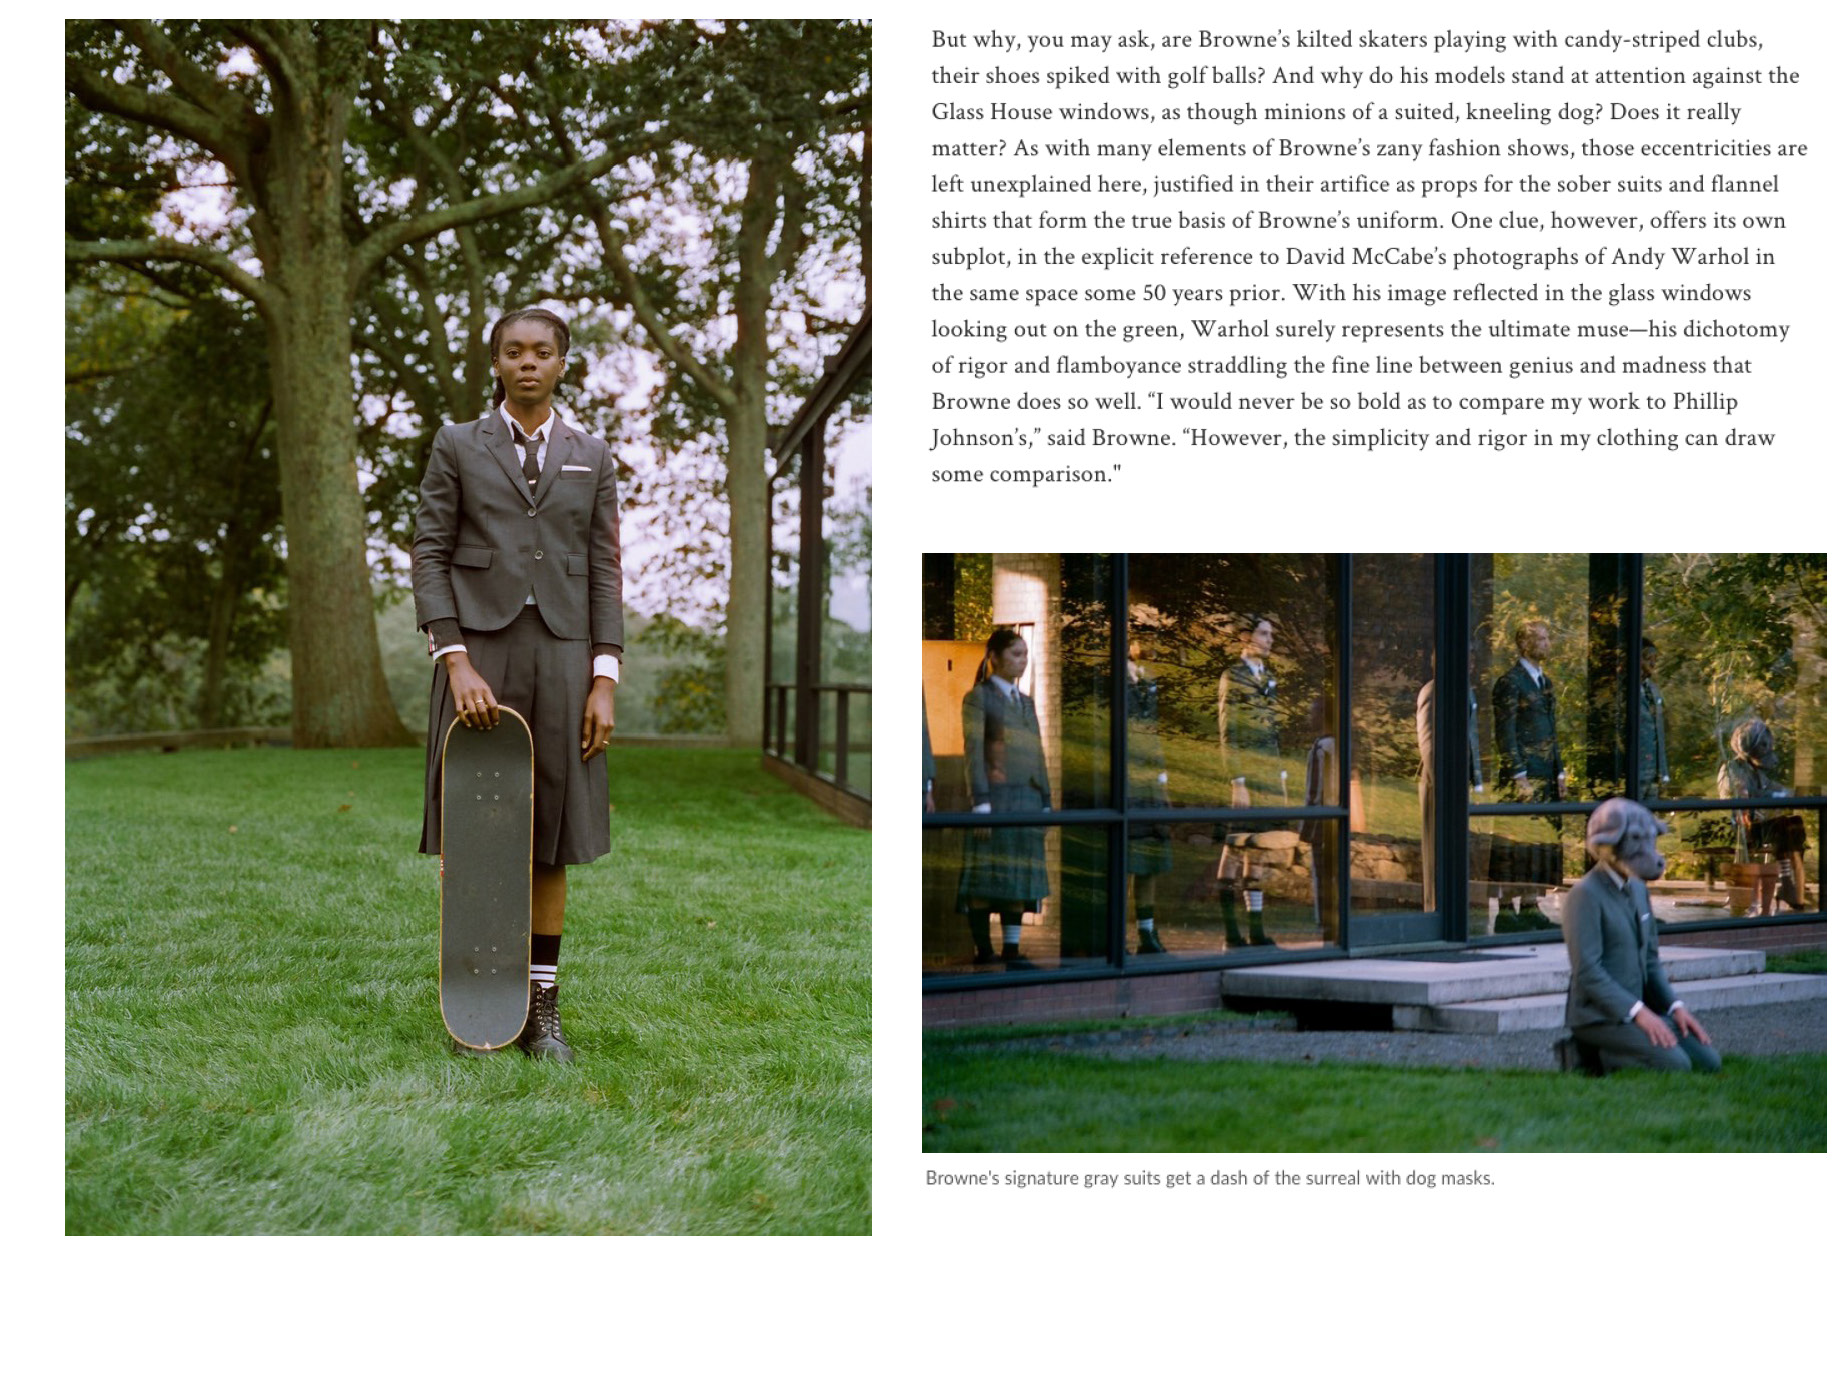 Dan Thawley | Architectural Digest | AD: Thom Browne stages his latest shoot at Philip Johnson's Glass house | 7